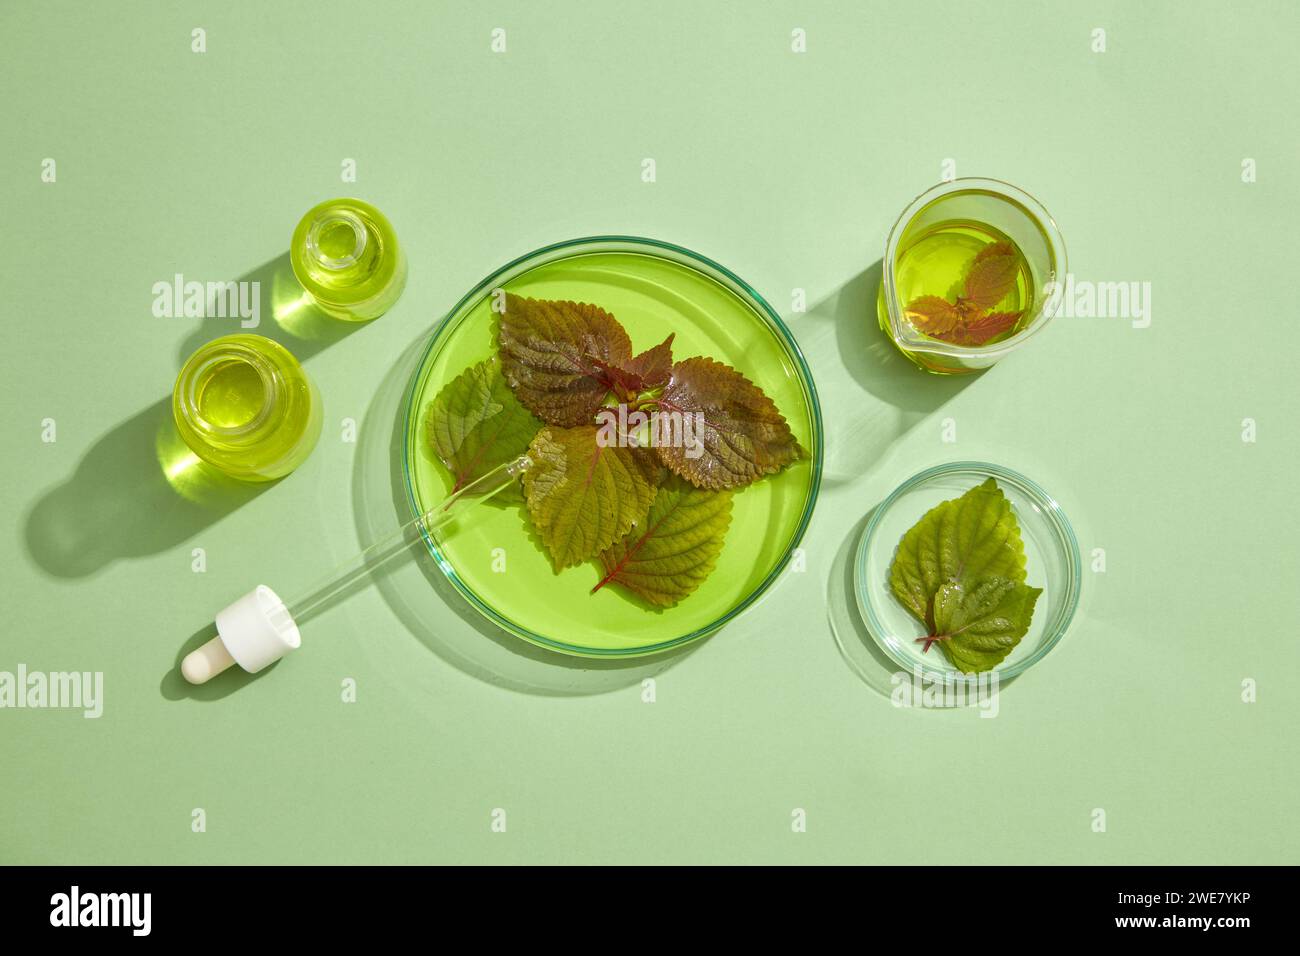 Yellow essential oil extracted from Beefsteak Plant (Perilla frutescens) is contained inside few jars, beaker and petri dishes. Science laboratory res Stock Photo